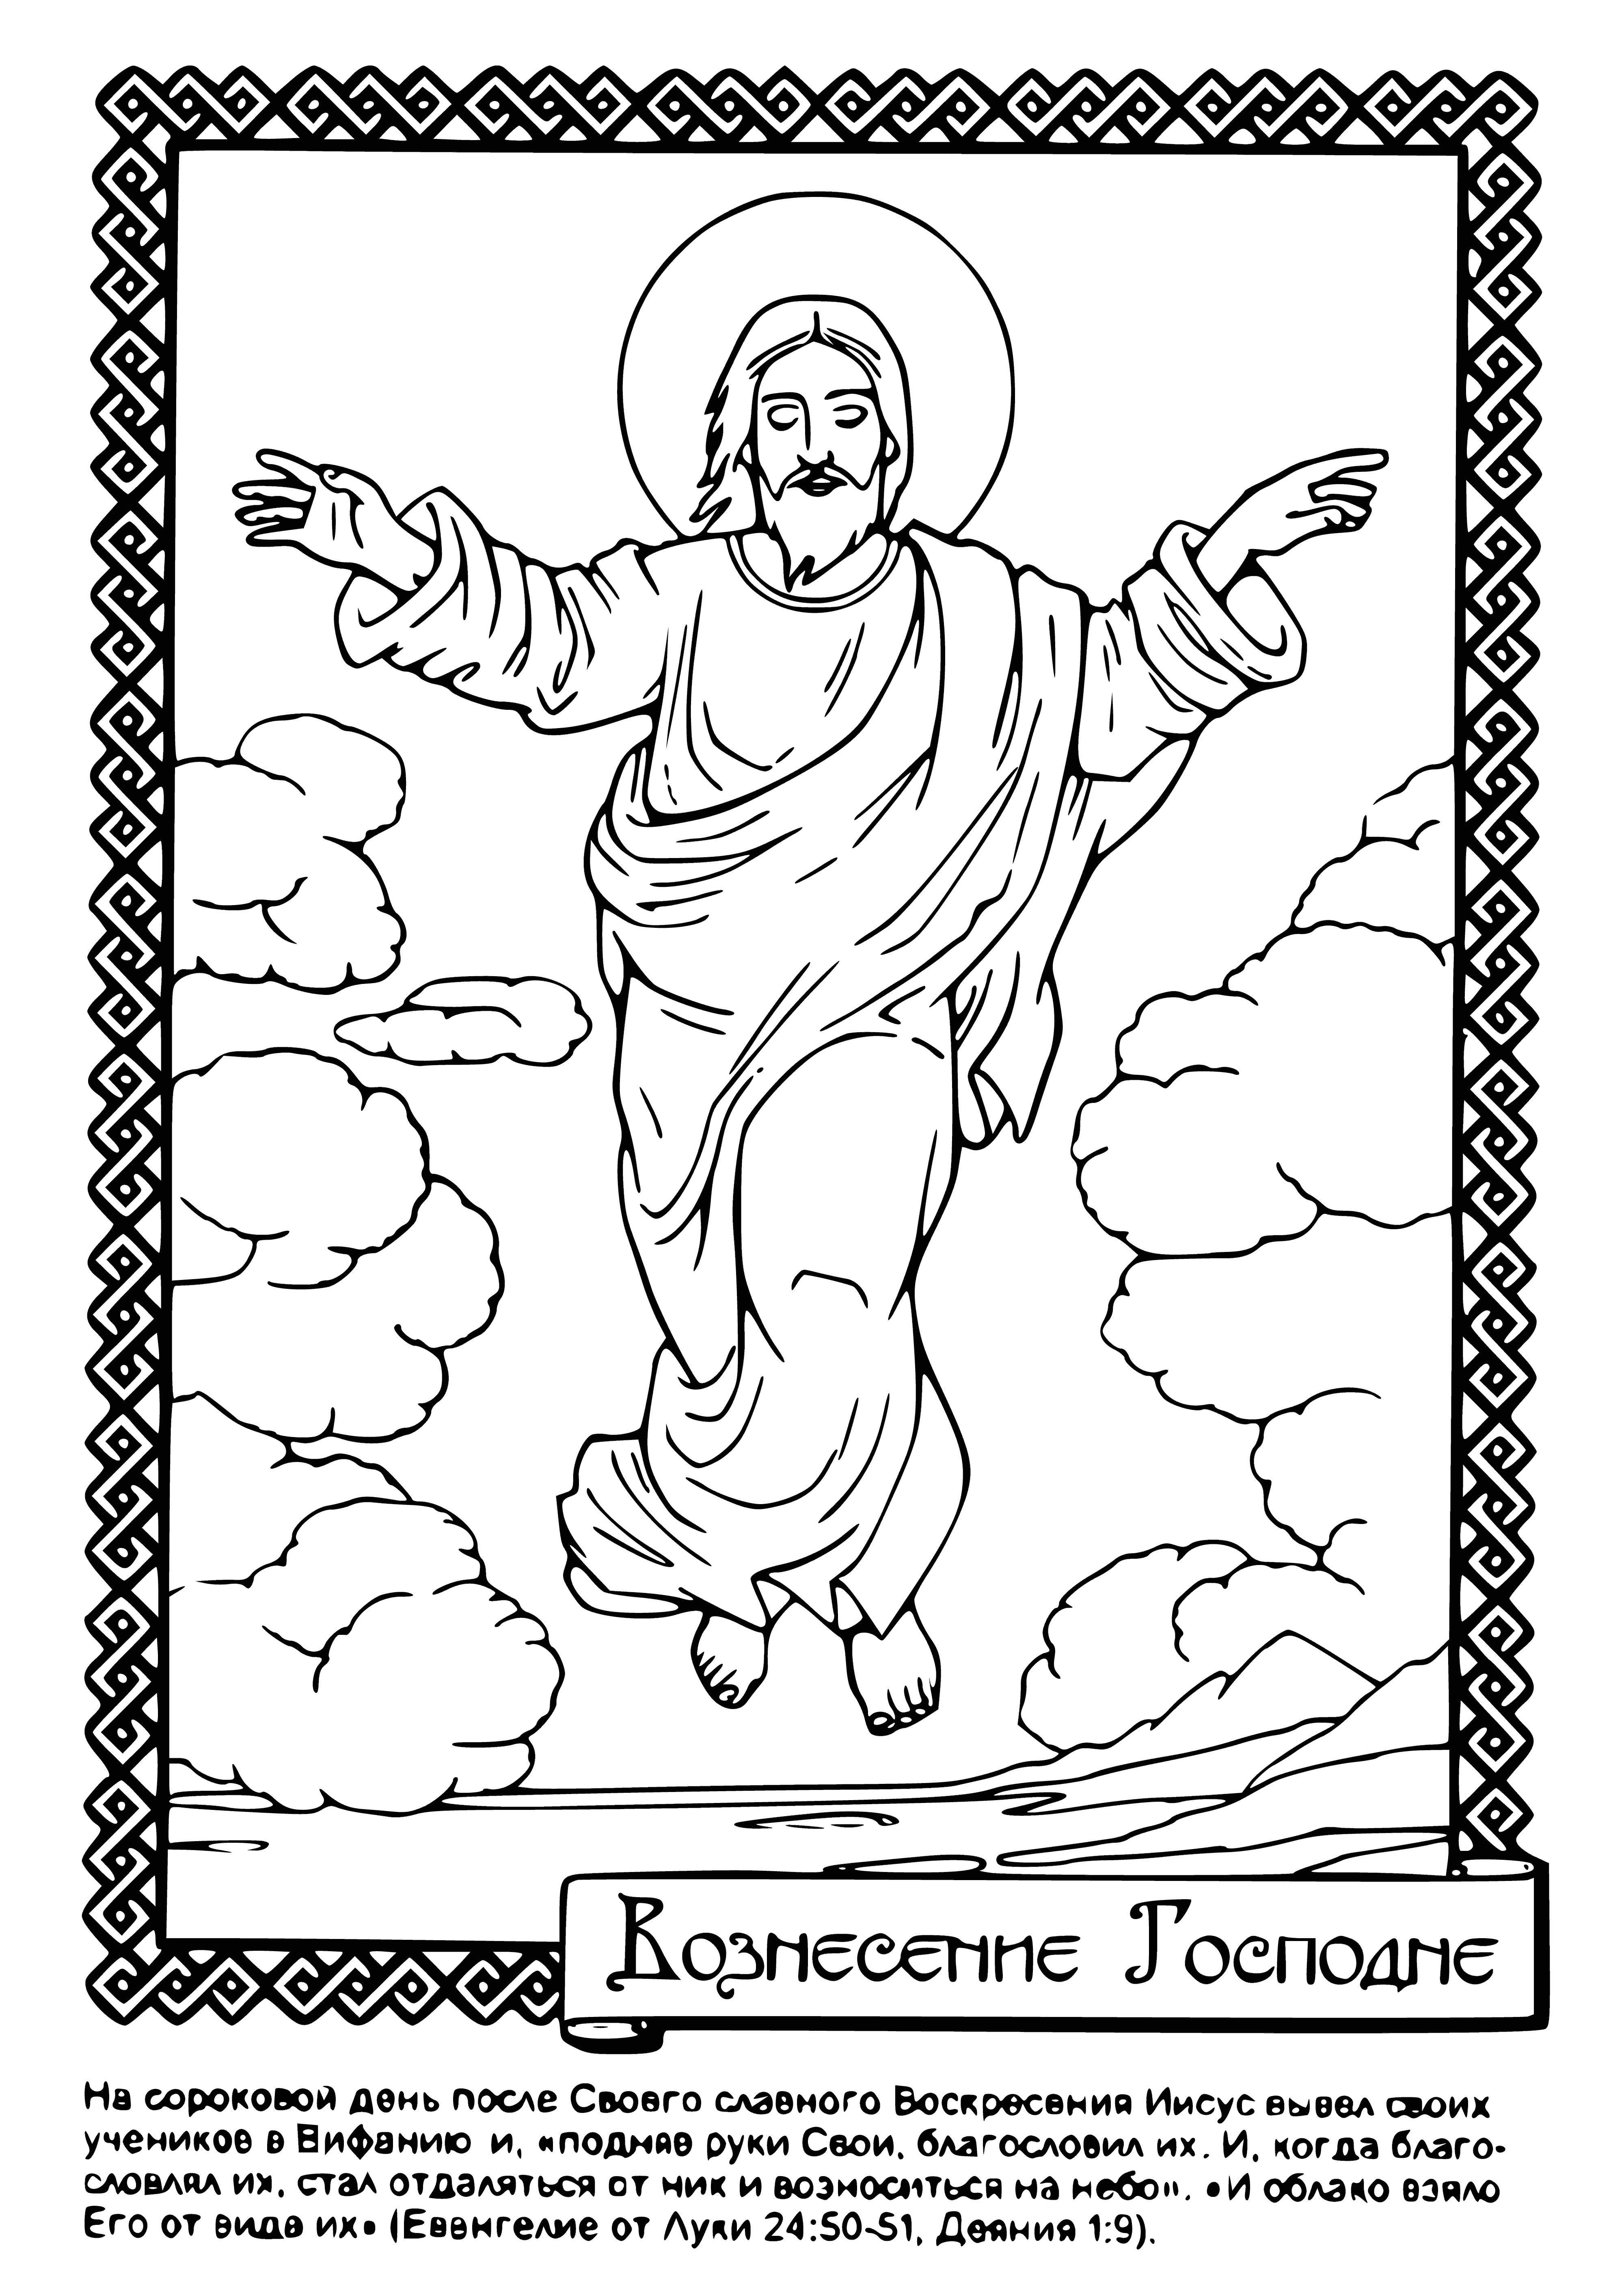 coloring page: Orthodox Christians celebrate Ascension Day, honoring Jesus' bodily ascension into heaven with church services & special meals.